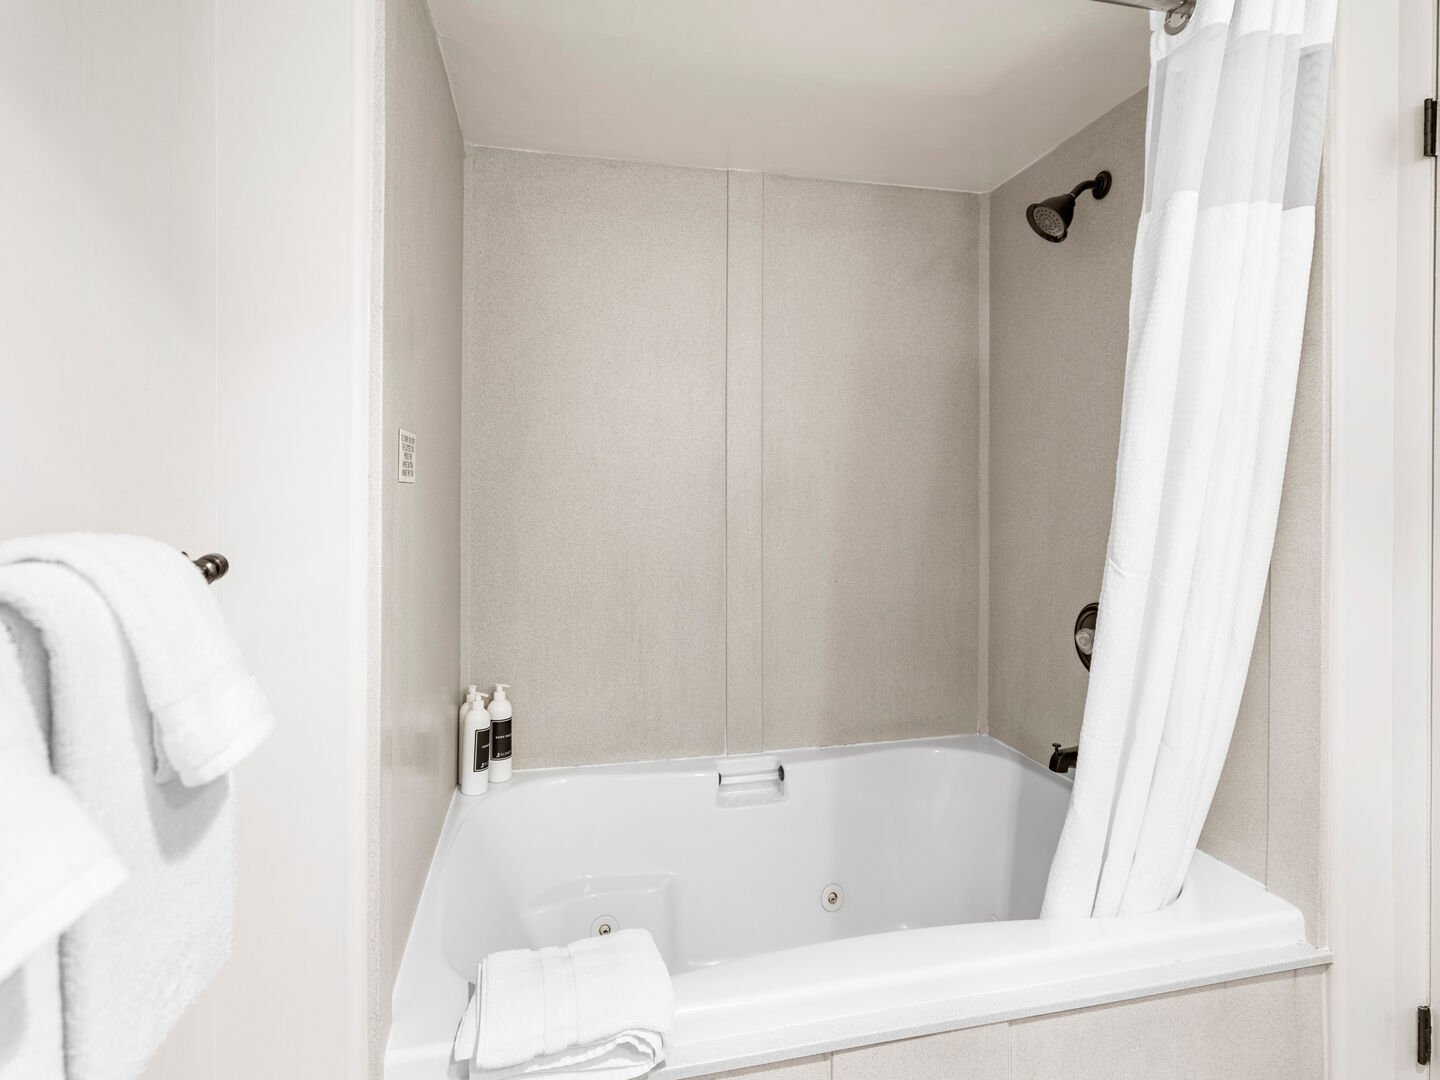 Jetted Tub / Shower